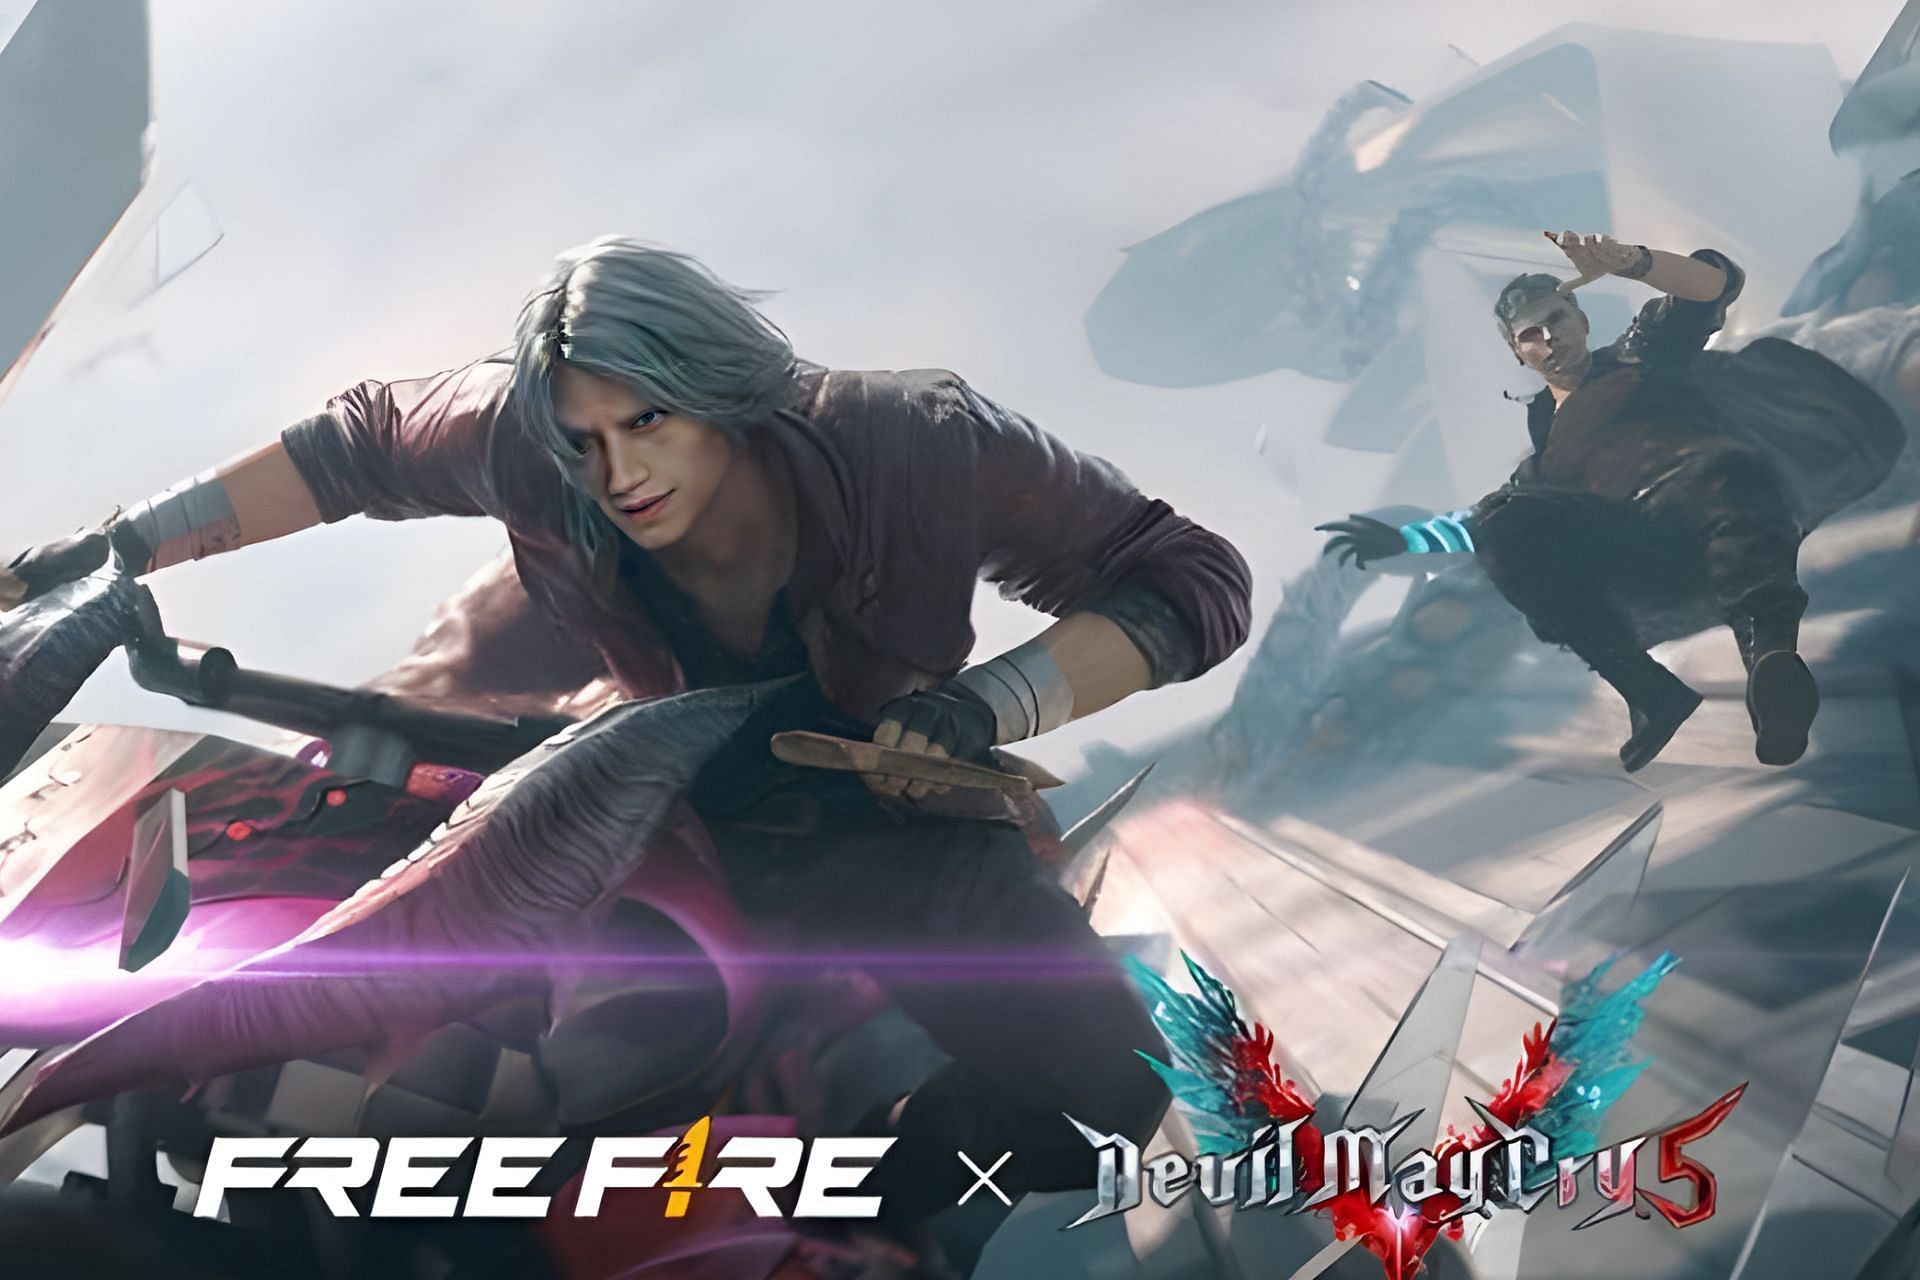 Garena confirms Free Fire x Devil May Cry 5 collaboration (Image via Instagram/freefiremalaysiaofficial)